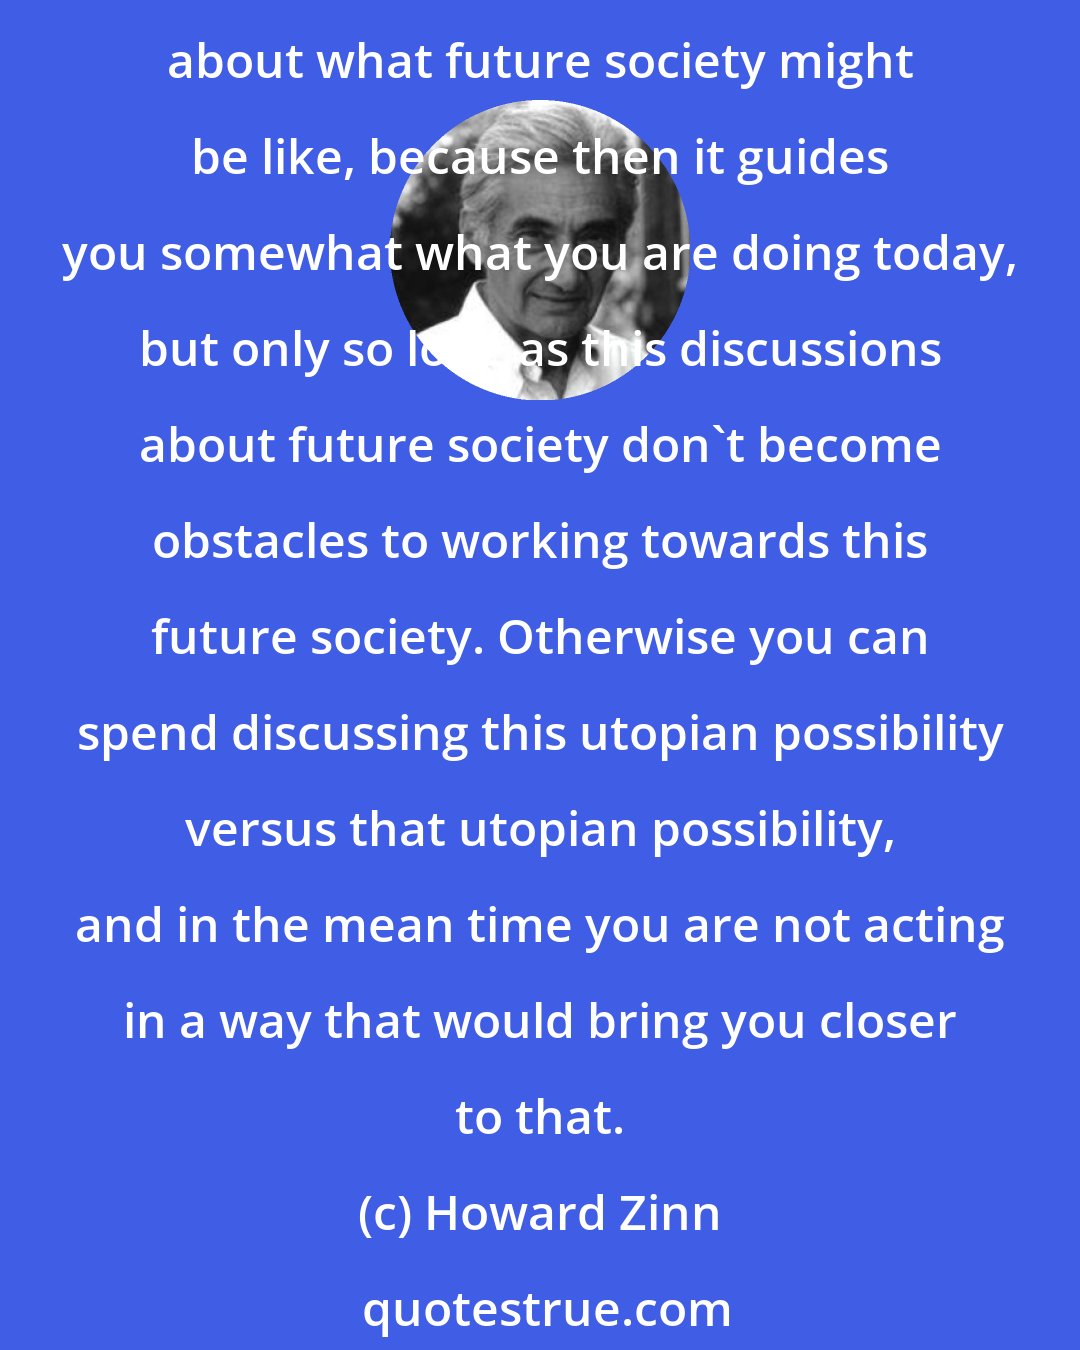 Howard Zinn: We cannot create blueprint for future society, but it is good to think about that. It is good to have in mind a goal. It is constructive, it is helpful, it is healthy, to think about what future society might be like, because then it guides you somewhat what you are doing today, but only so long as this discussions about future society don't become obstacles to working towards this future society. Otherwise you can spend discussing this utopian possibility versus that utopian possibility, and in the mean time you are not acting in a way that would bring you closer to that.